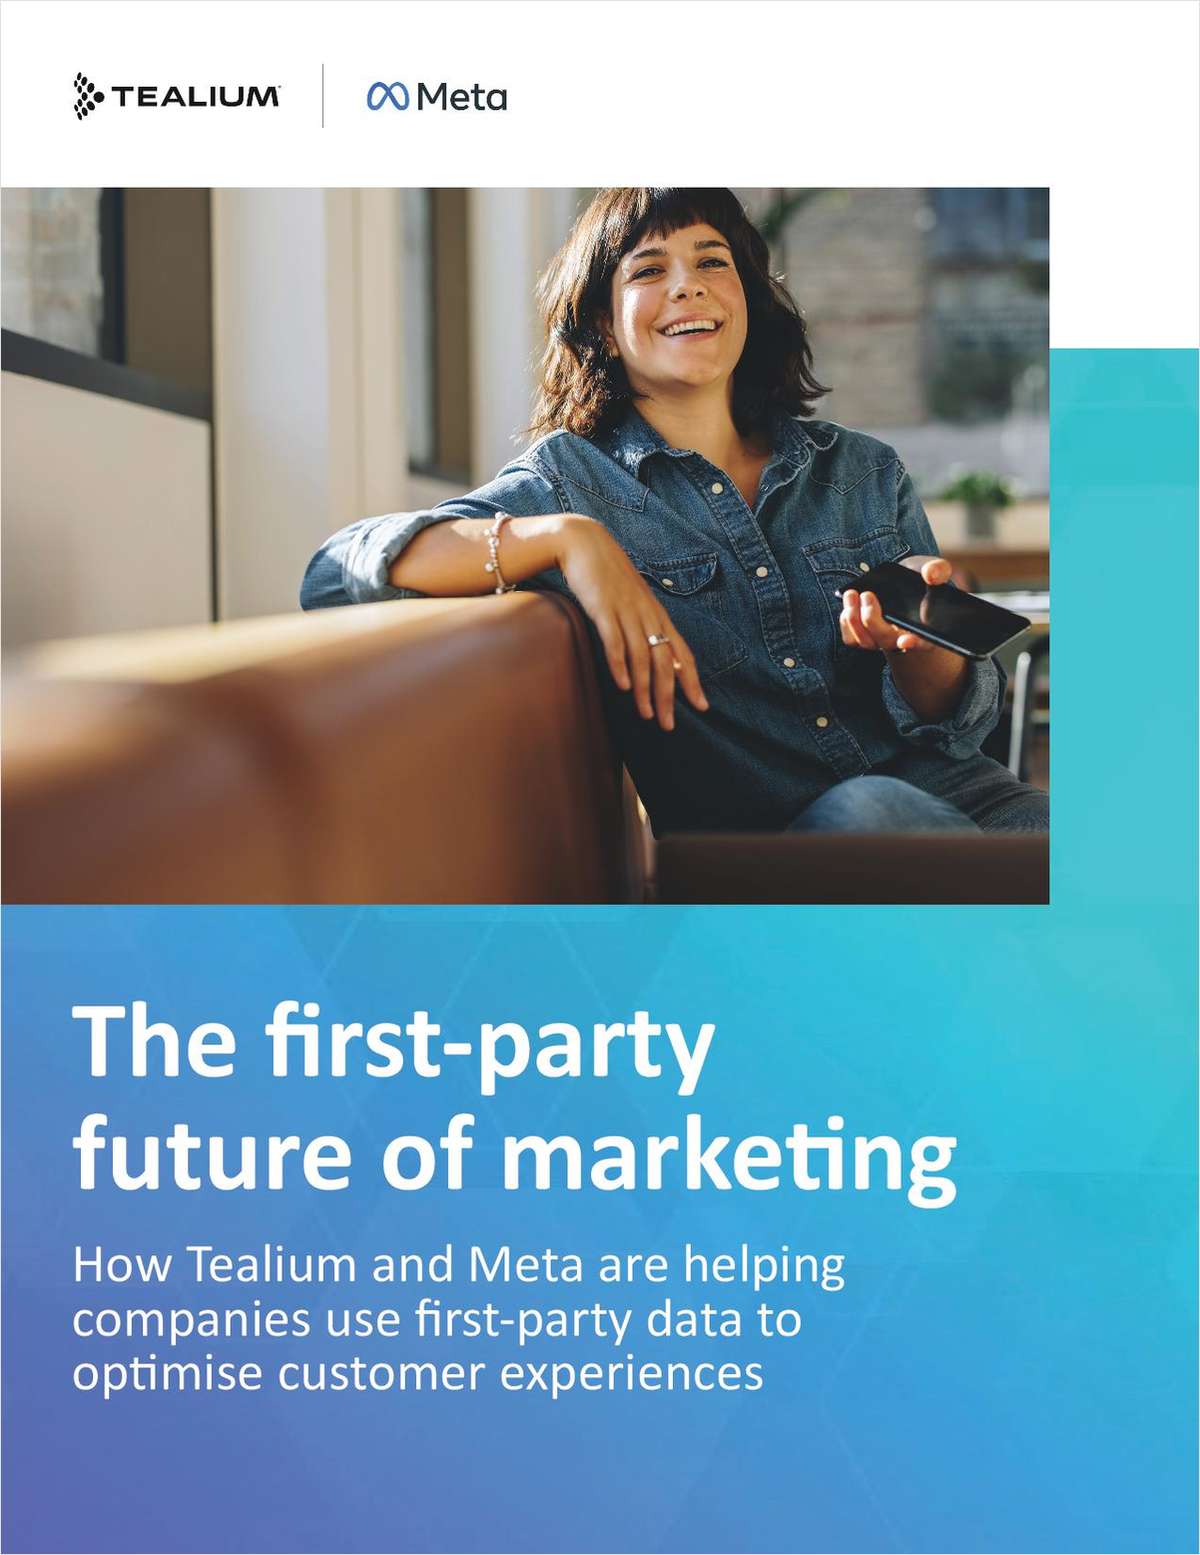 Future First-Party of Marketing